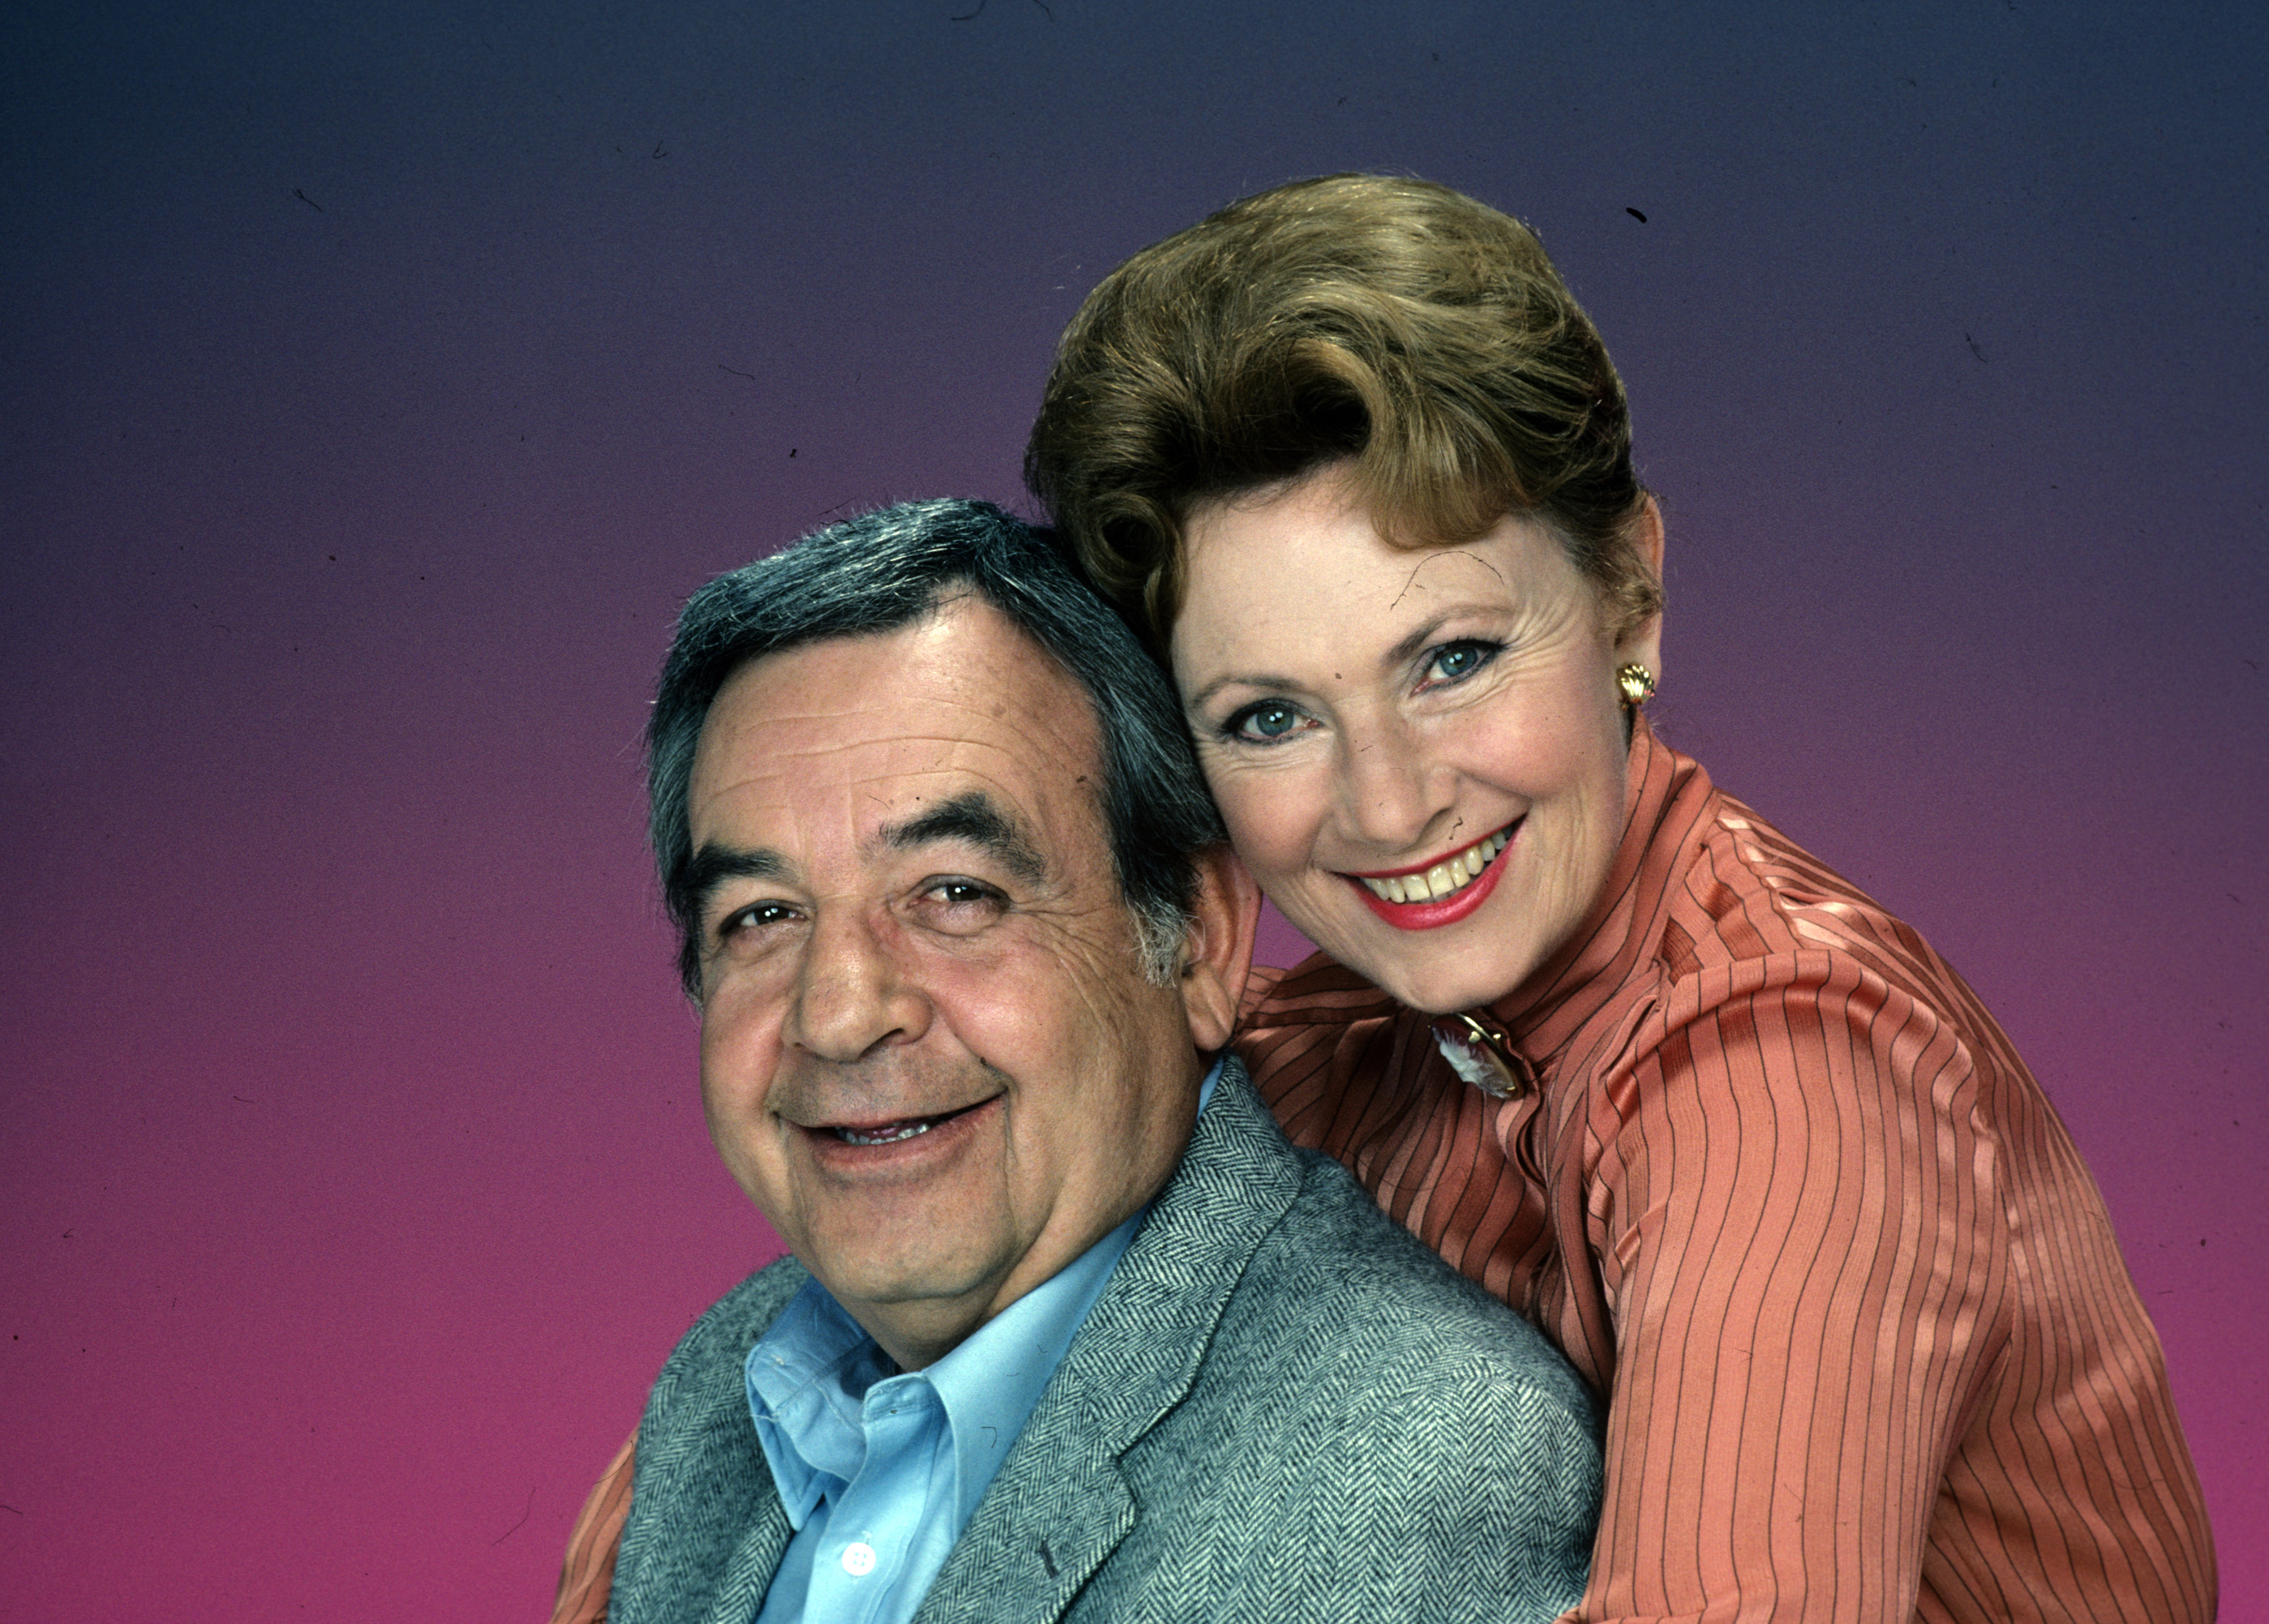 Tom Bosley and Marion Ross in "Happy Days," 2008 | Source: Getty Images